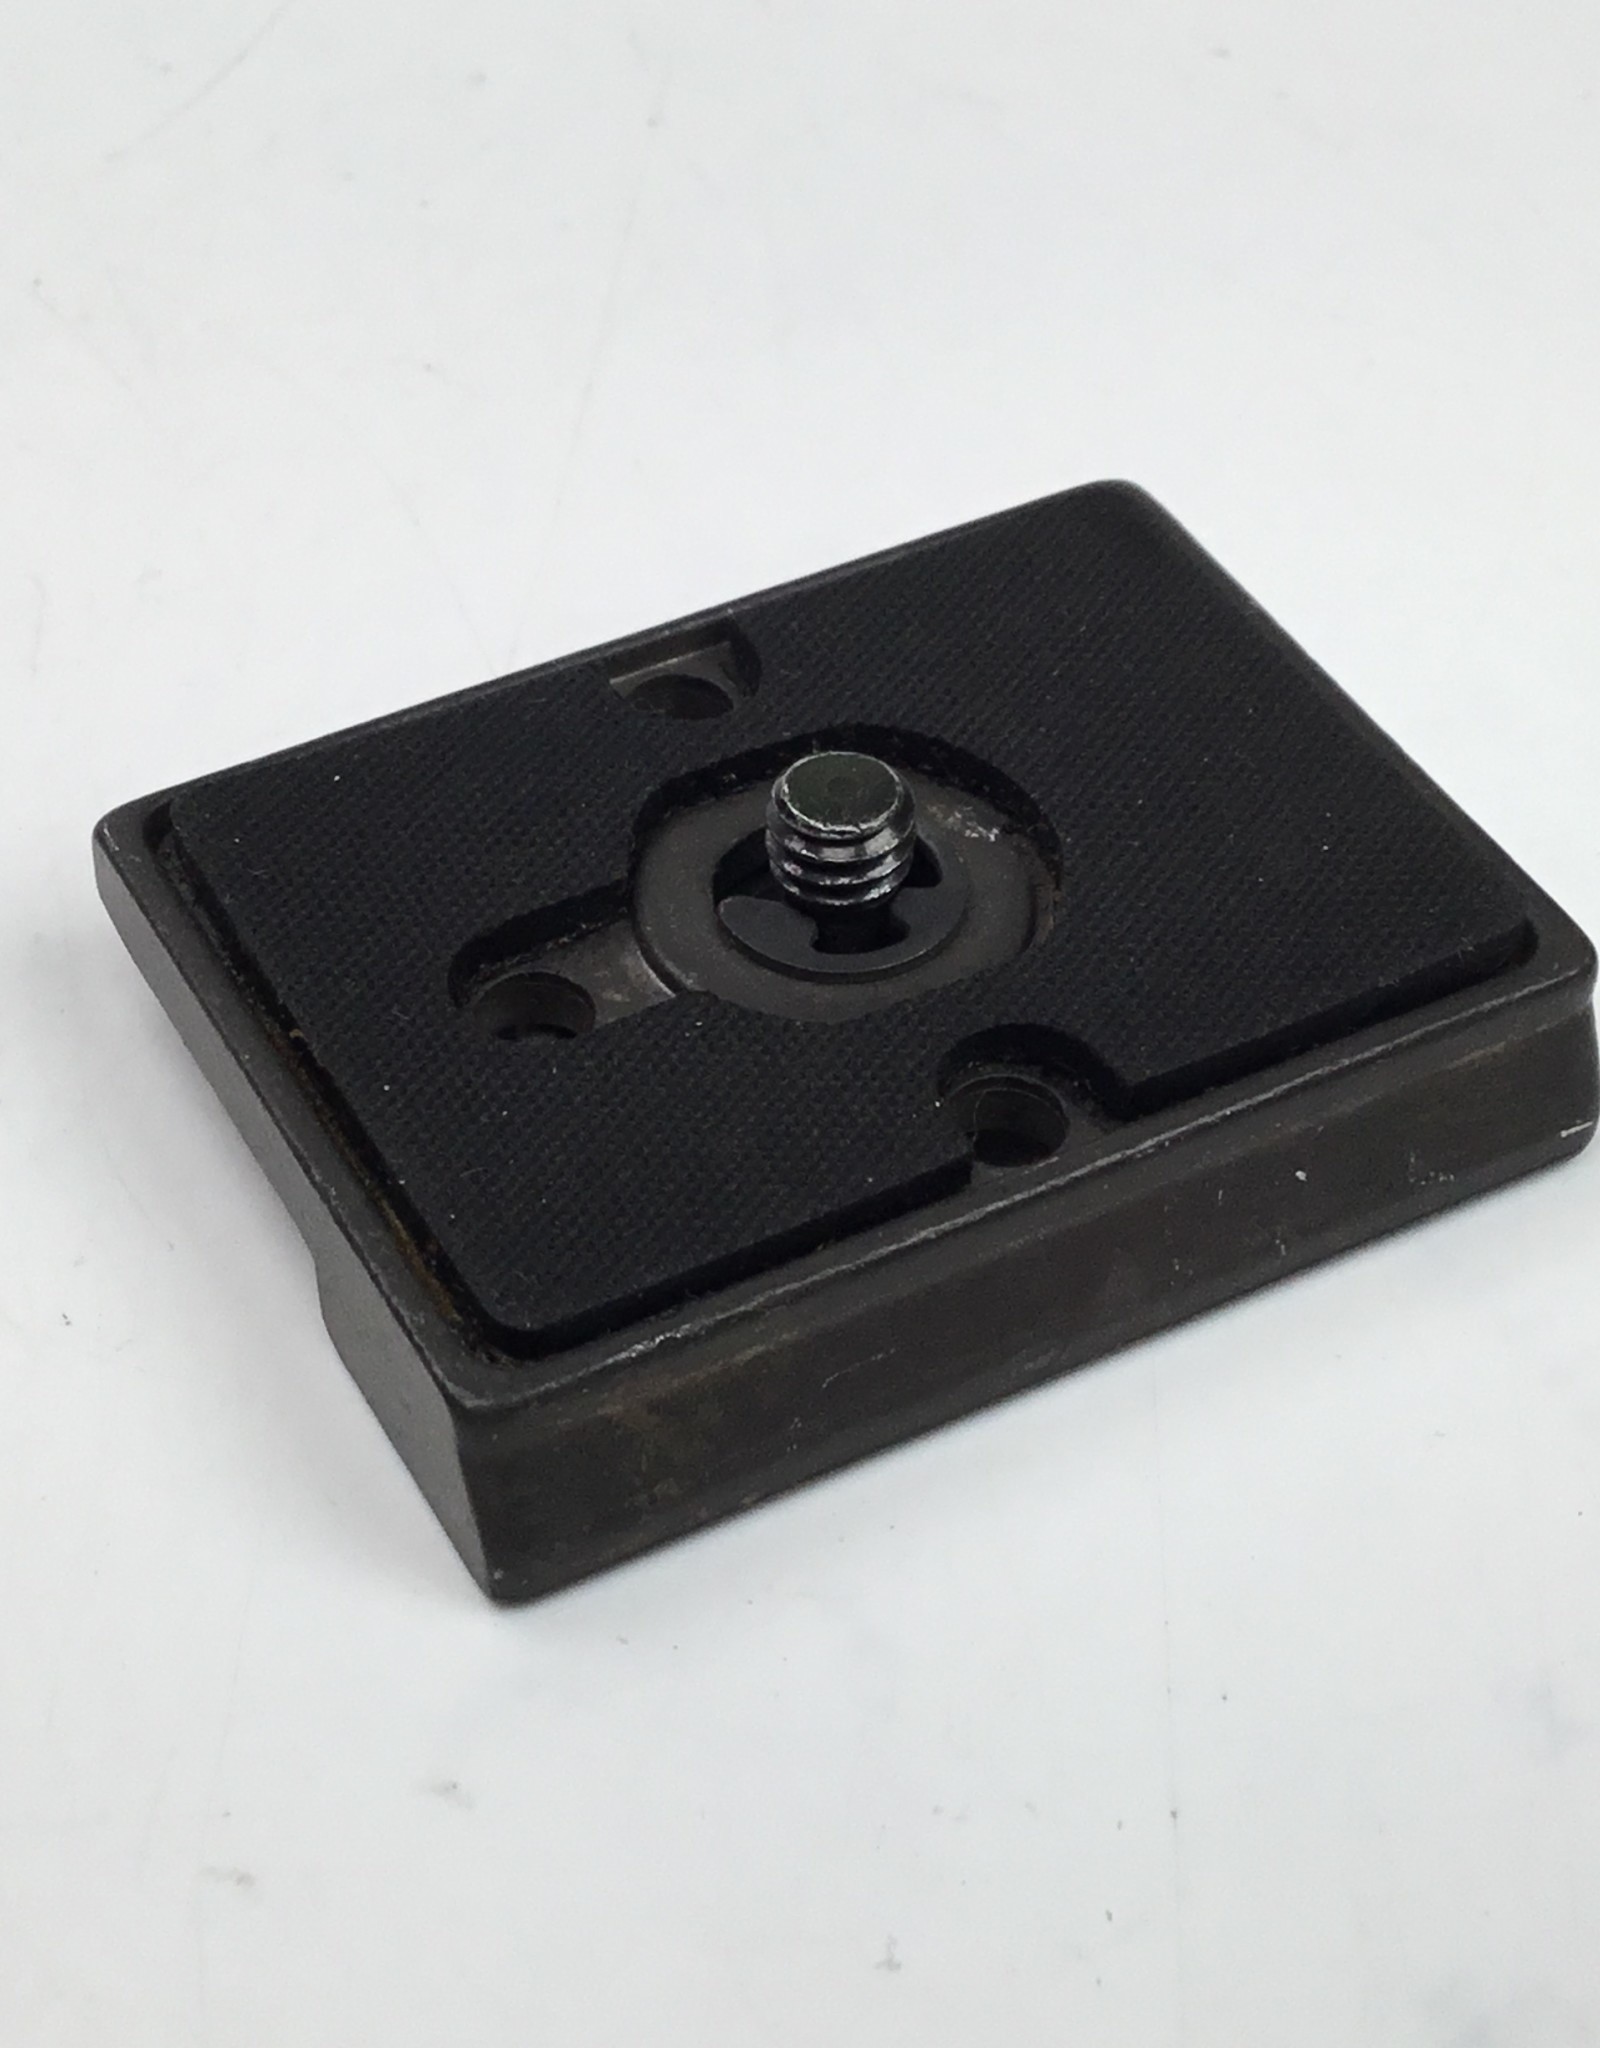 MANFROTTO Manfrotto RC2 Quick Release Plate Used Good